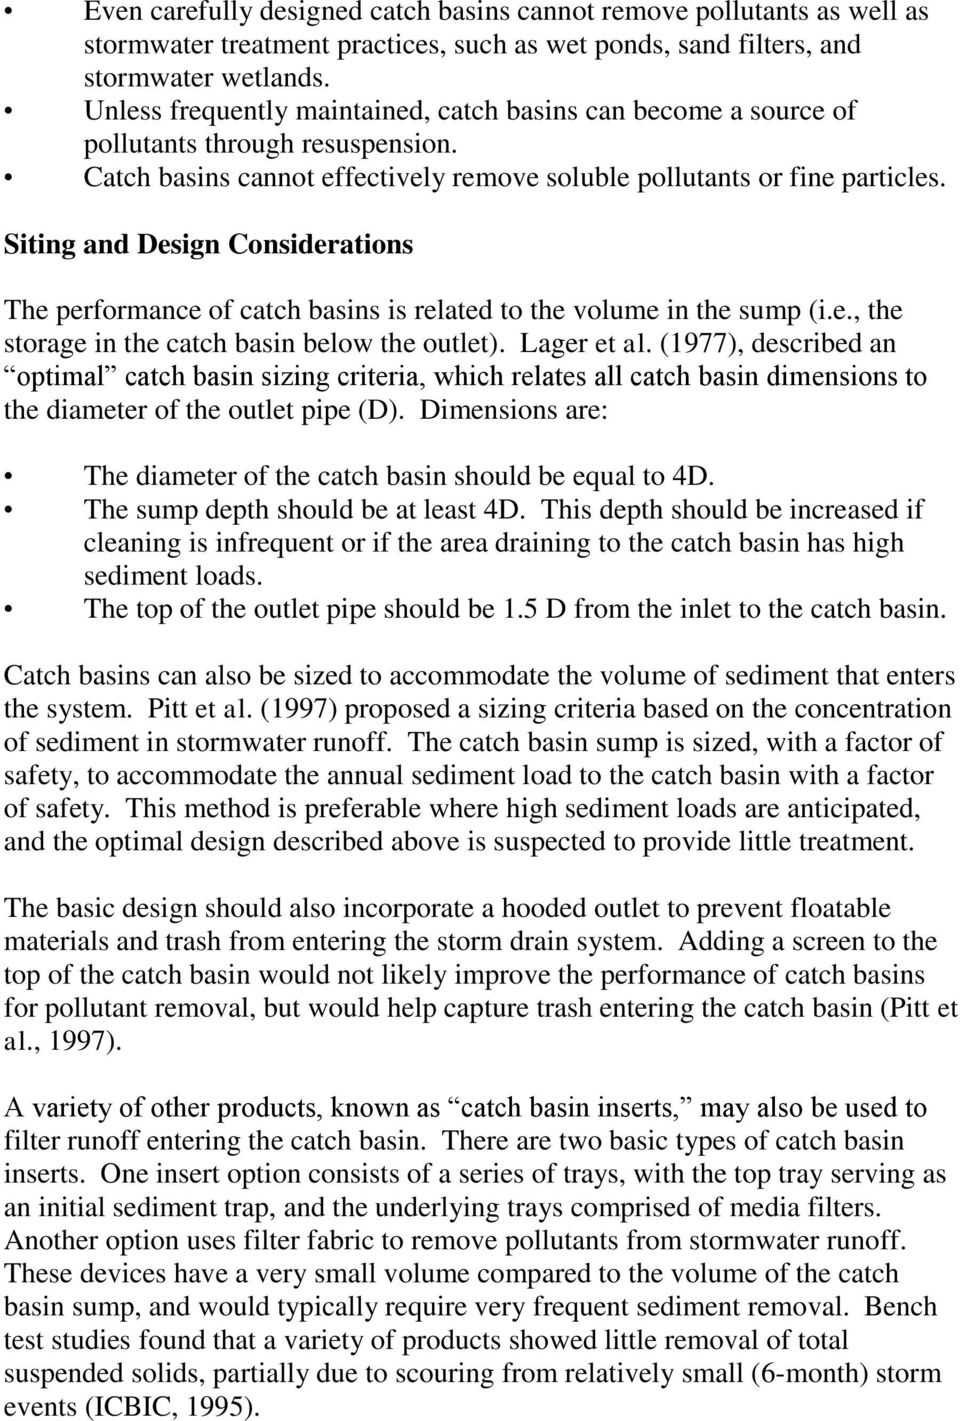 Siting and Design Considerations The performance of catch basins is related to the volume in the sump (i.e., the storage in the catch basin below the outlet). Lager et al.